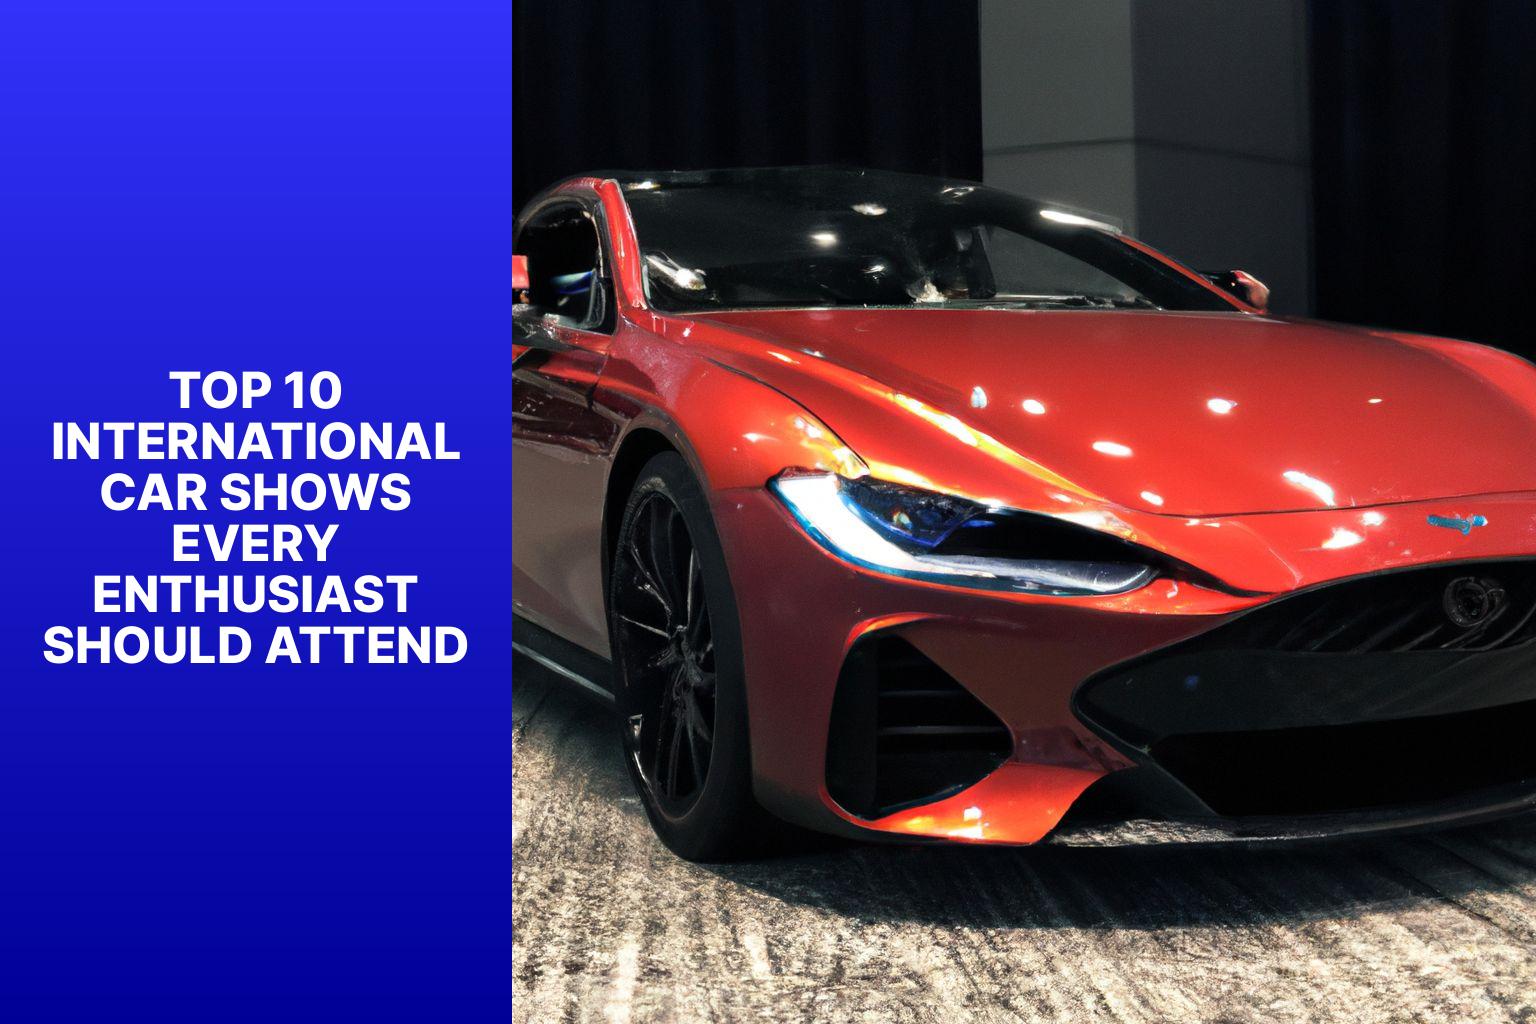 Top 10 International Car Shows Every Enthusiast Should Attend